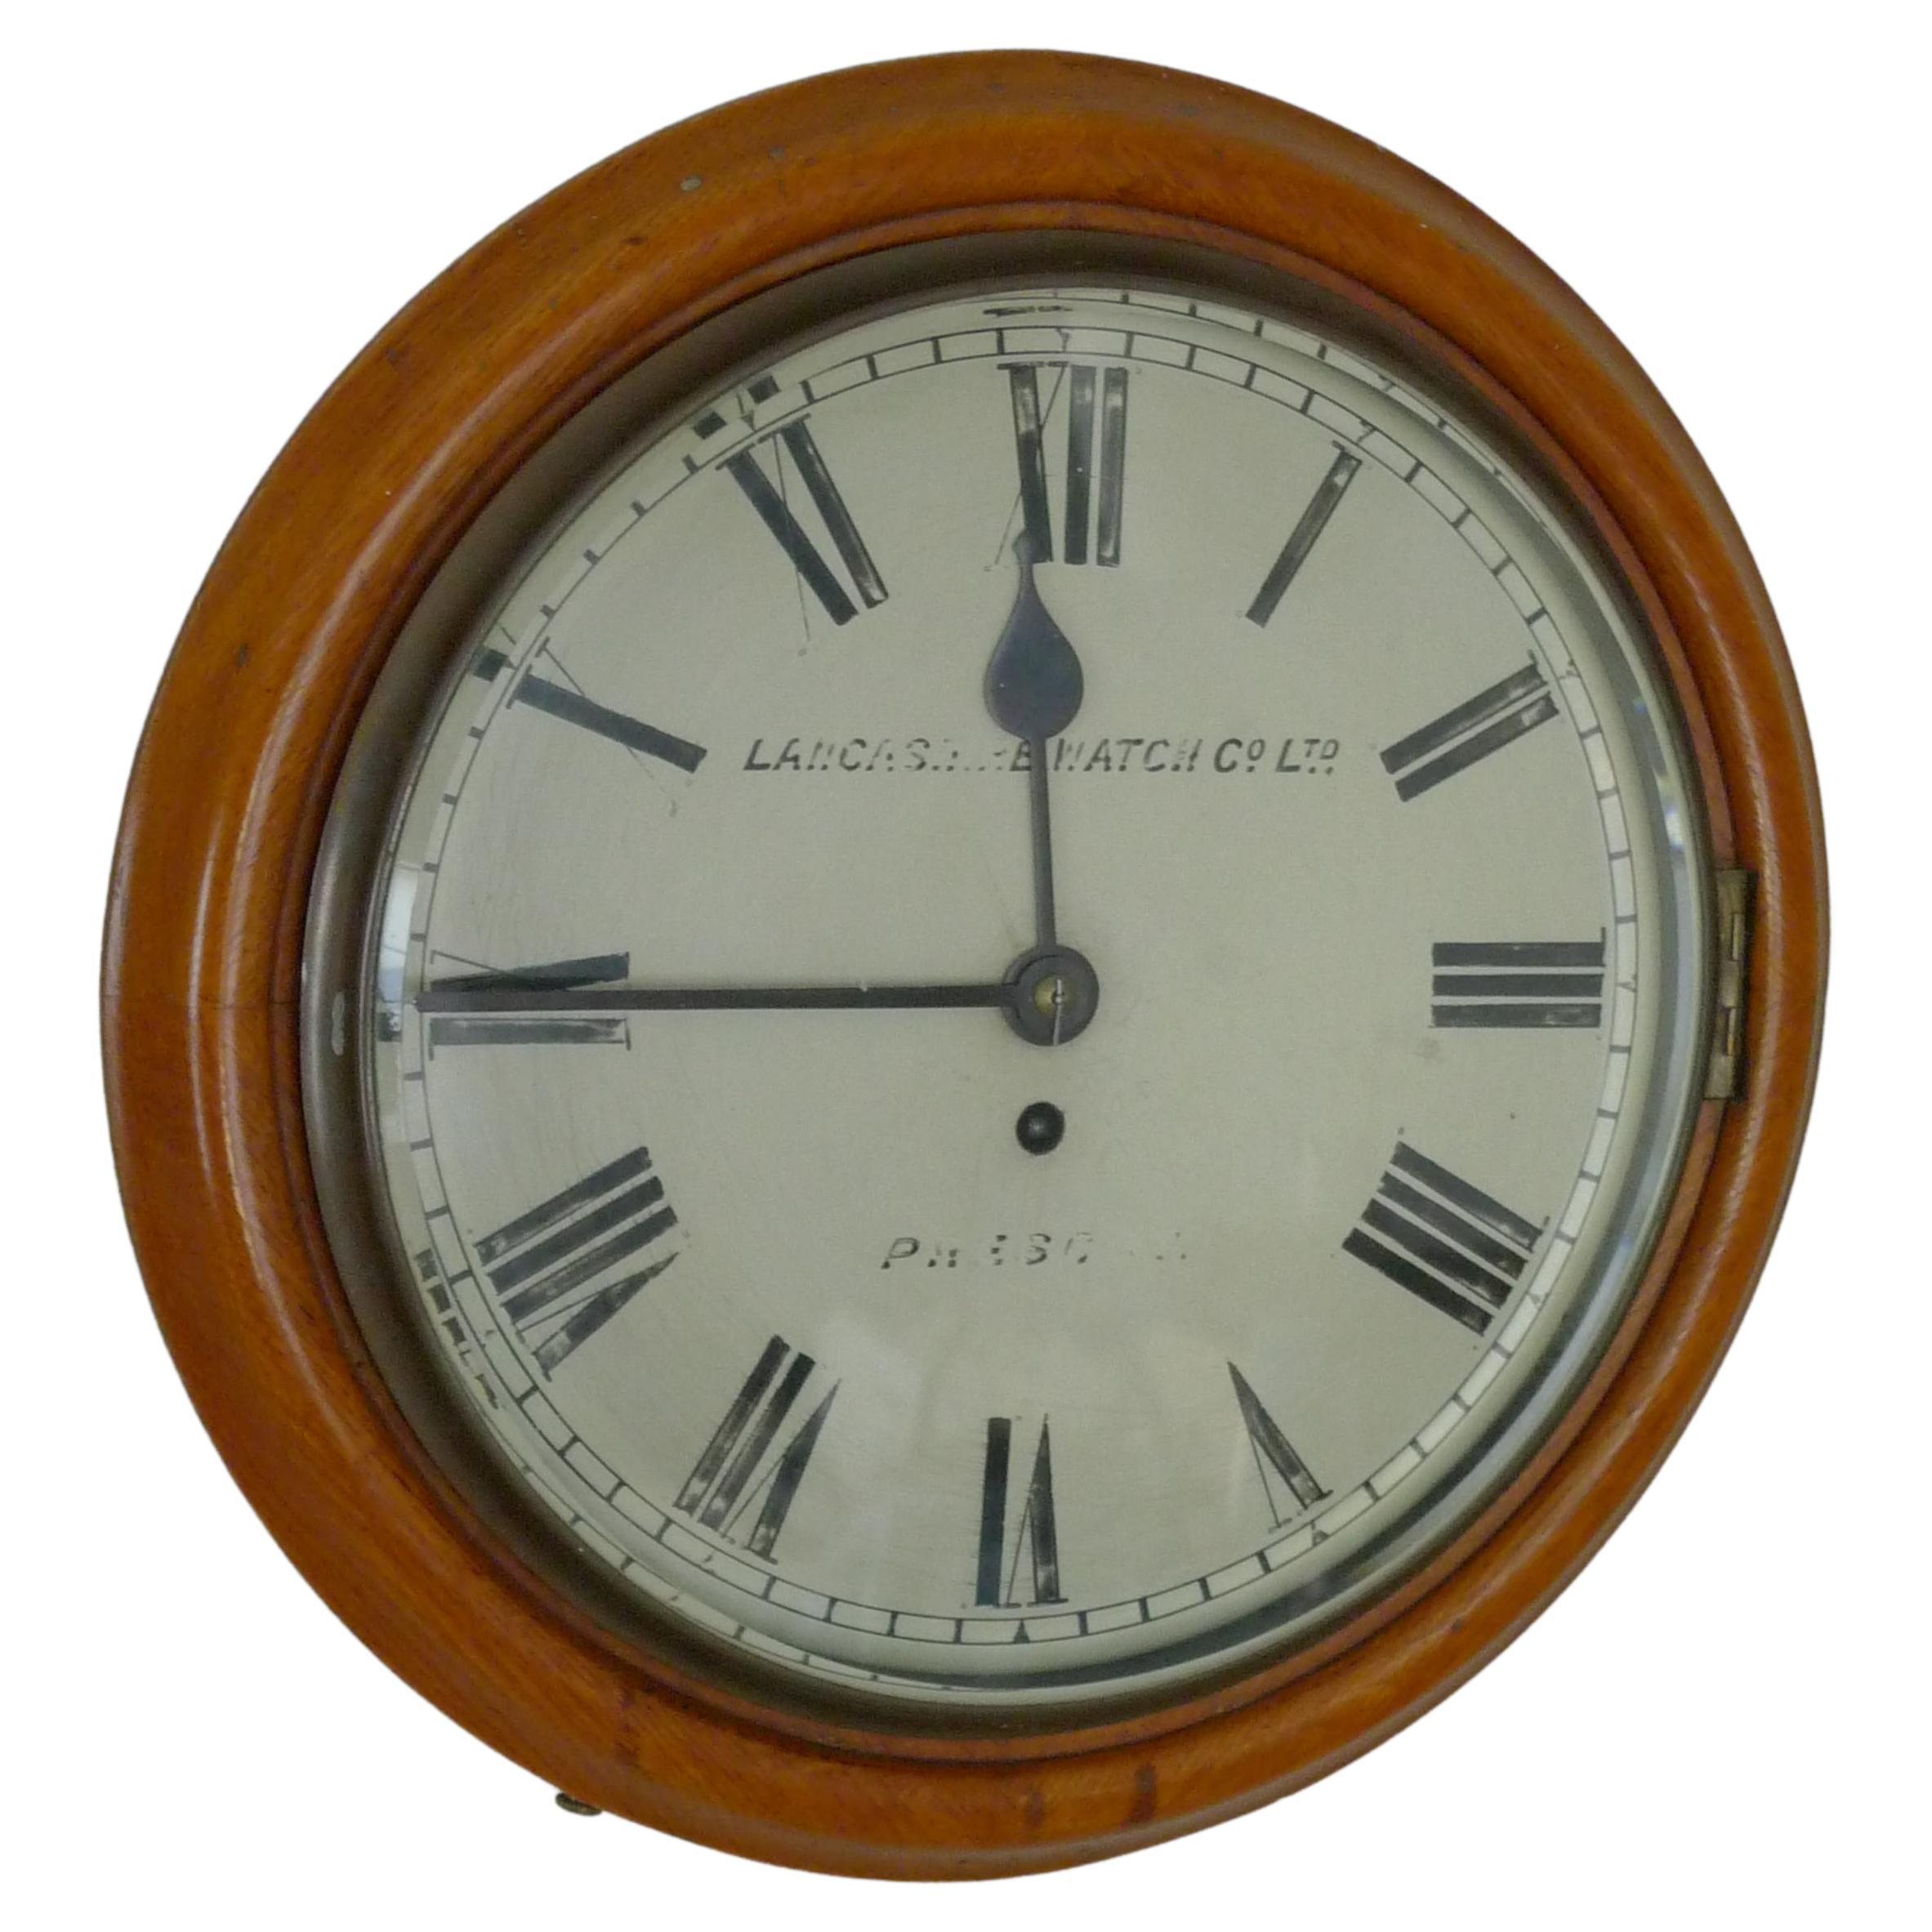 Wall clock by Lancashire Watch Co. from rail station, late 19th cent. Ships free For Sale